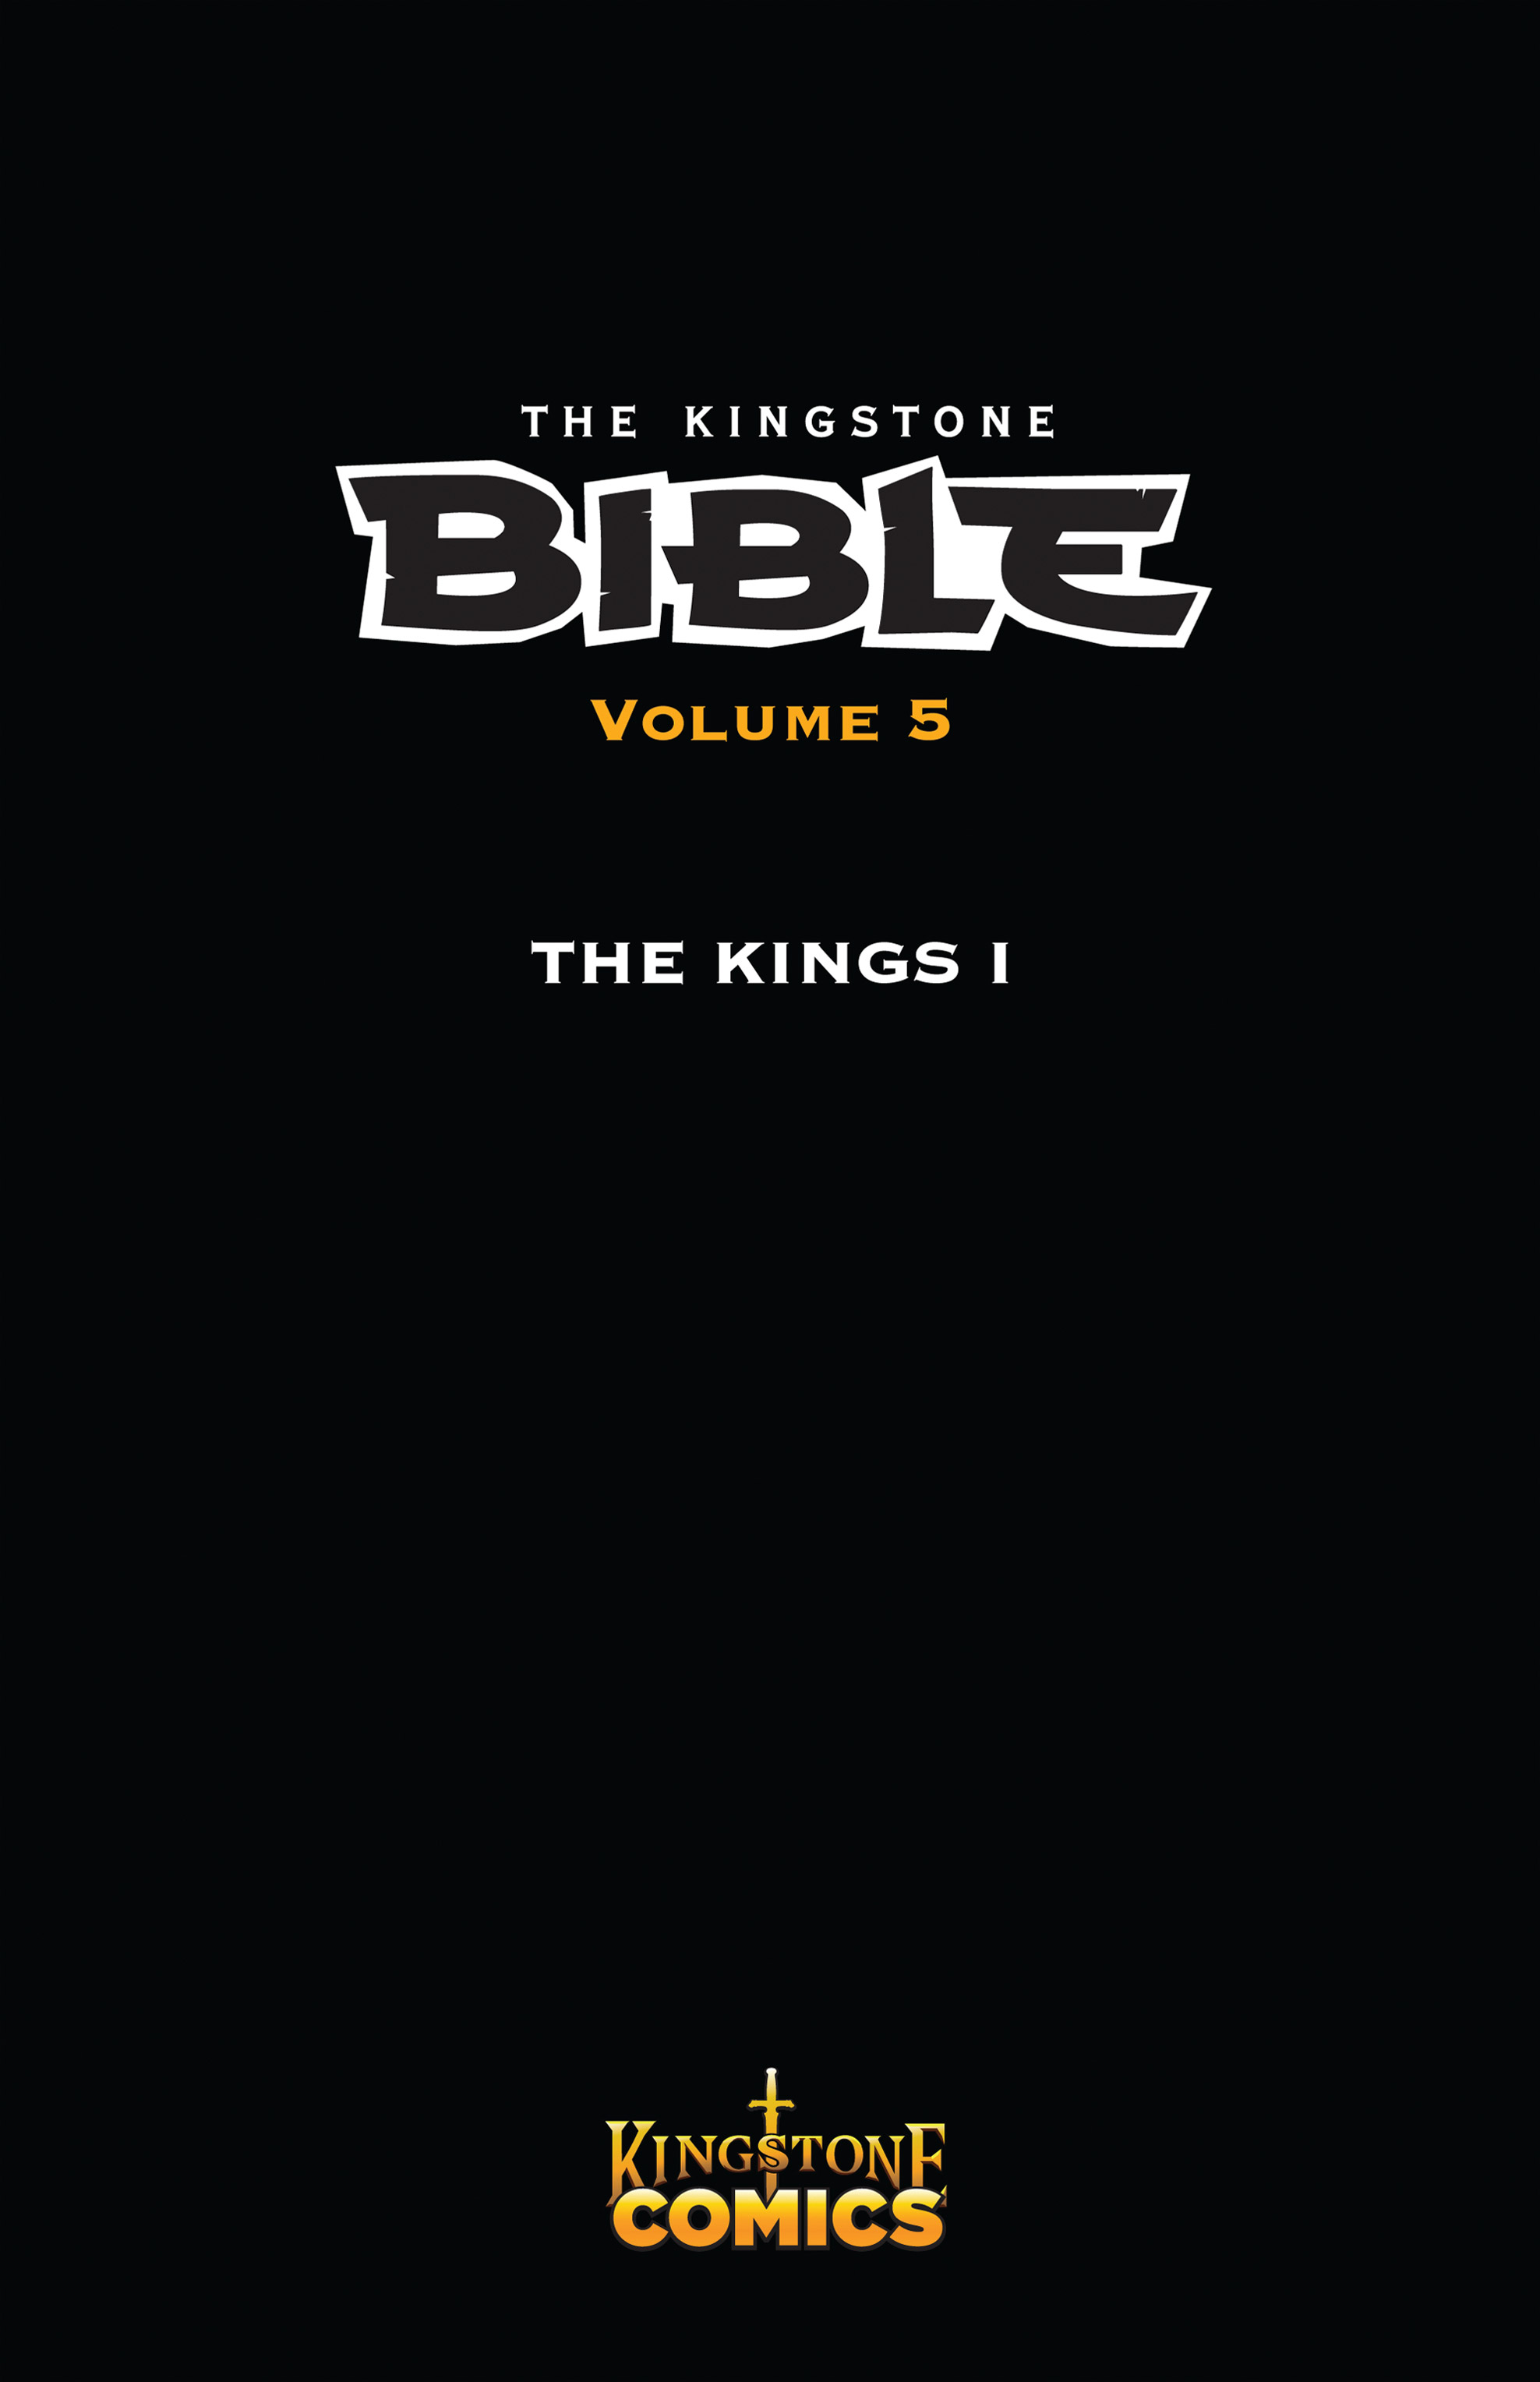 Read online The Kingstone Bible comic -  Issue #5 - 2